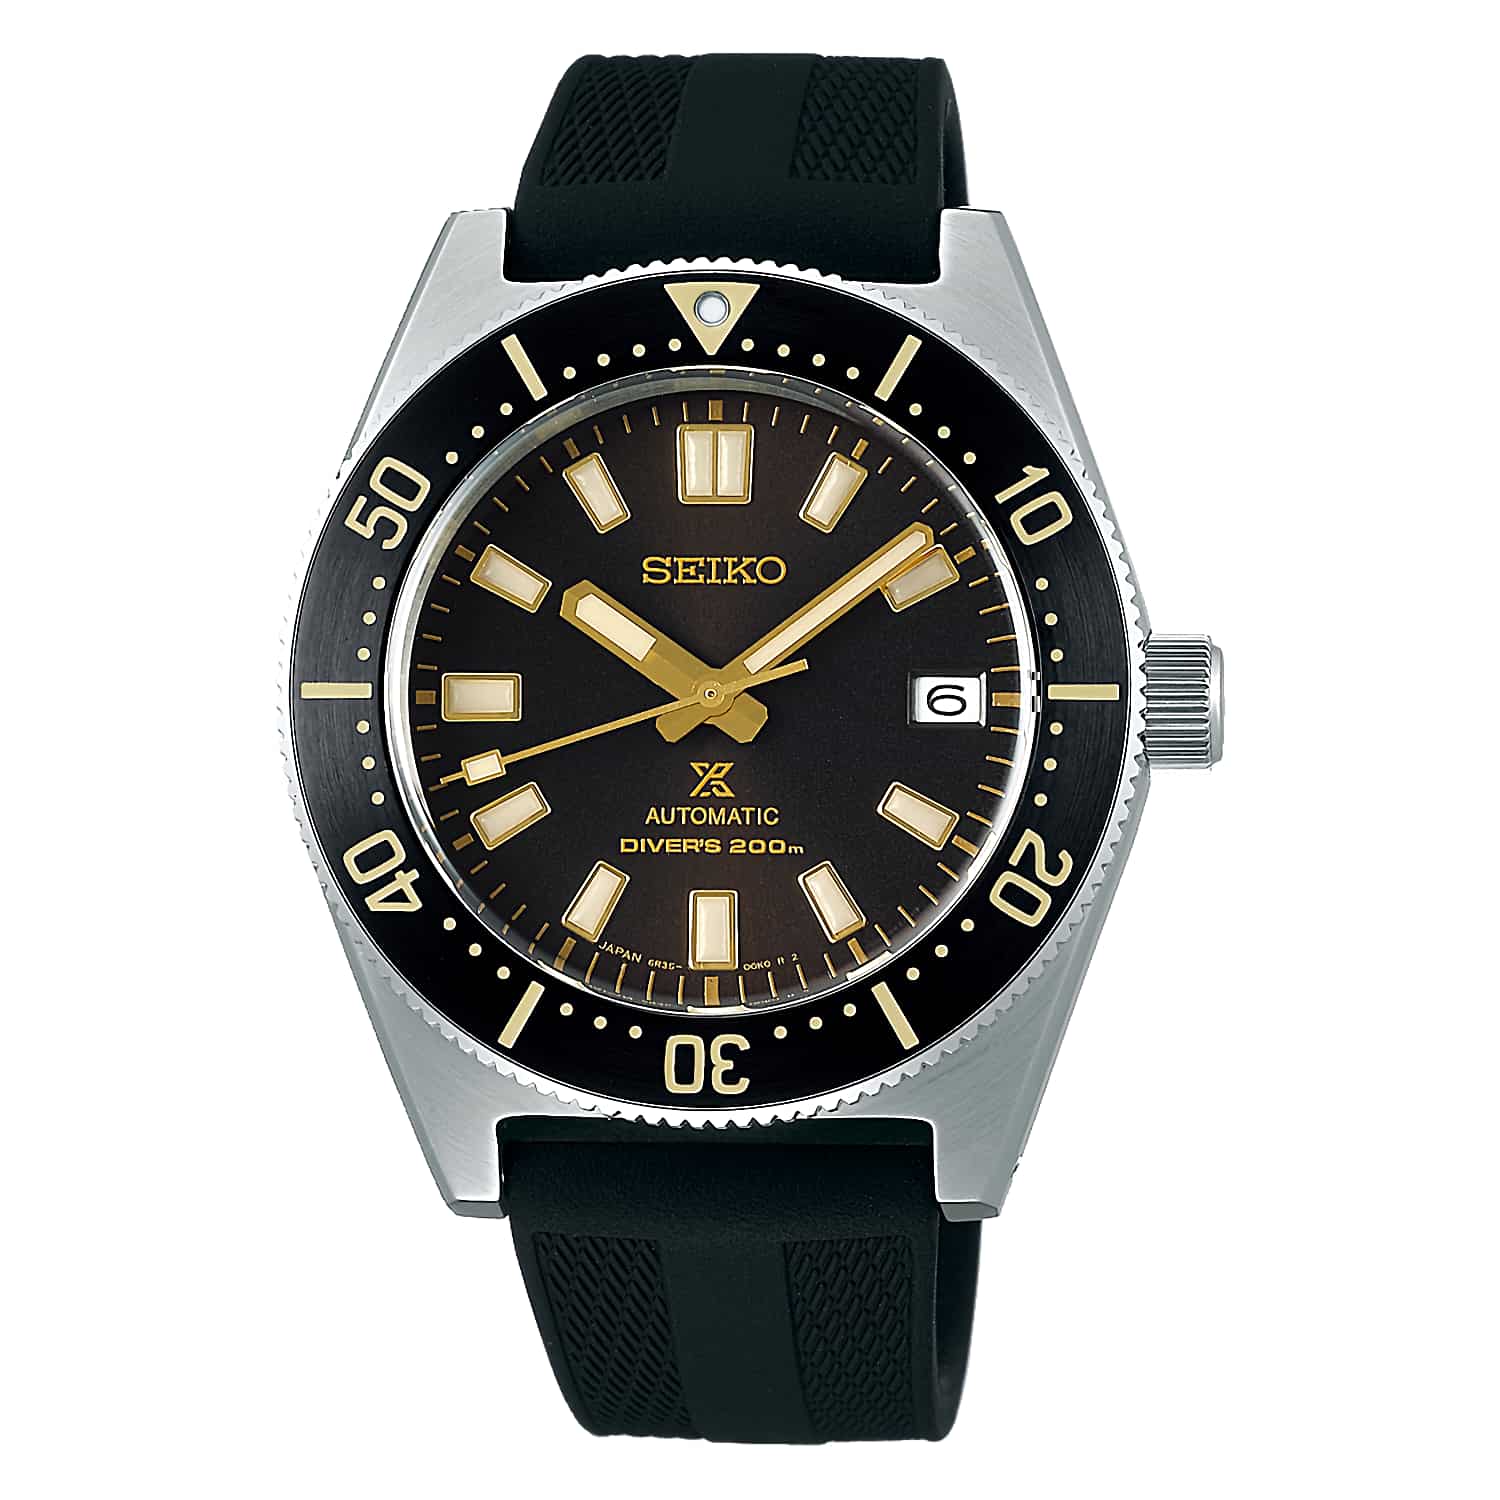 SPB147J1 SEIKO Prospex Automatic Divers Watch. Seiko Prospex challenges every limit, with a collection of timepieces for sports lovers and adventure seekers whether in the water, in the sky or on land. Since launching Japan’s first diver’s watch in 1965, 